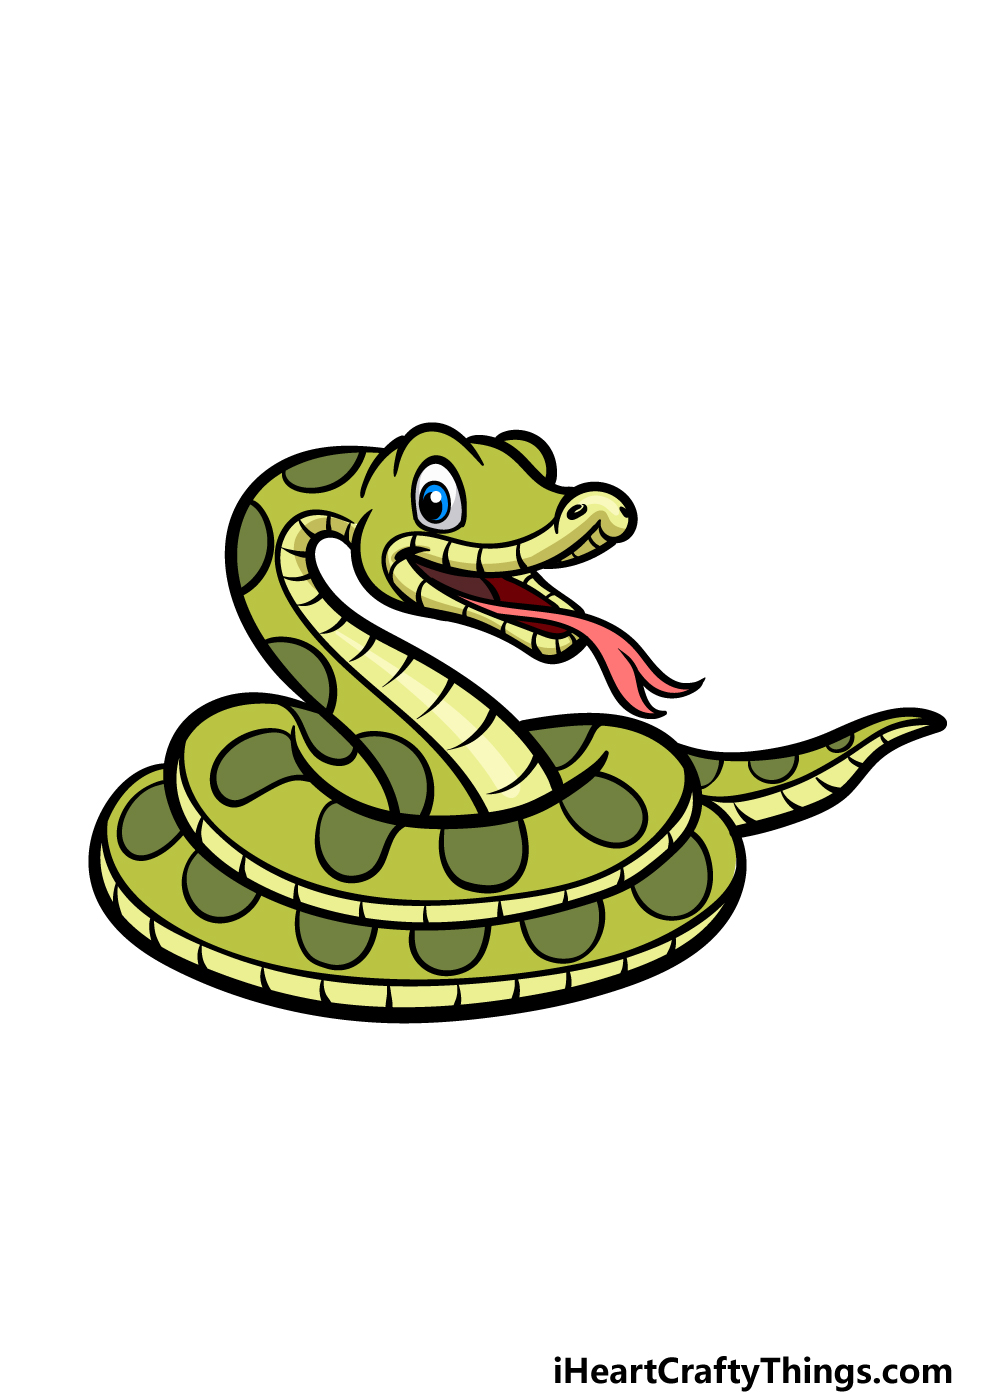 Cartoon Snake Drawing - How To Draw A Cartoon Snake Step By Step